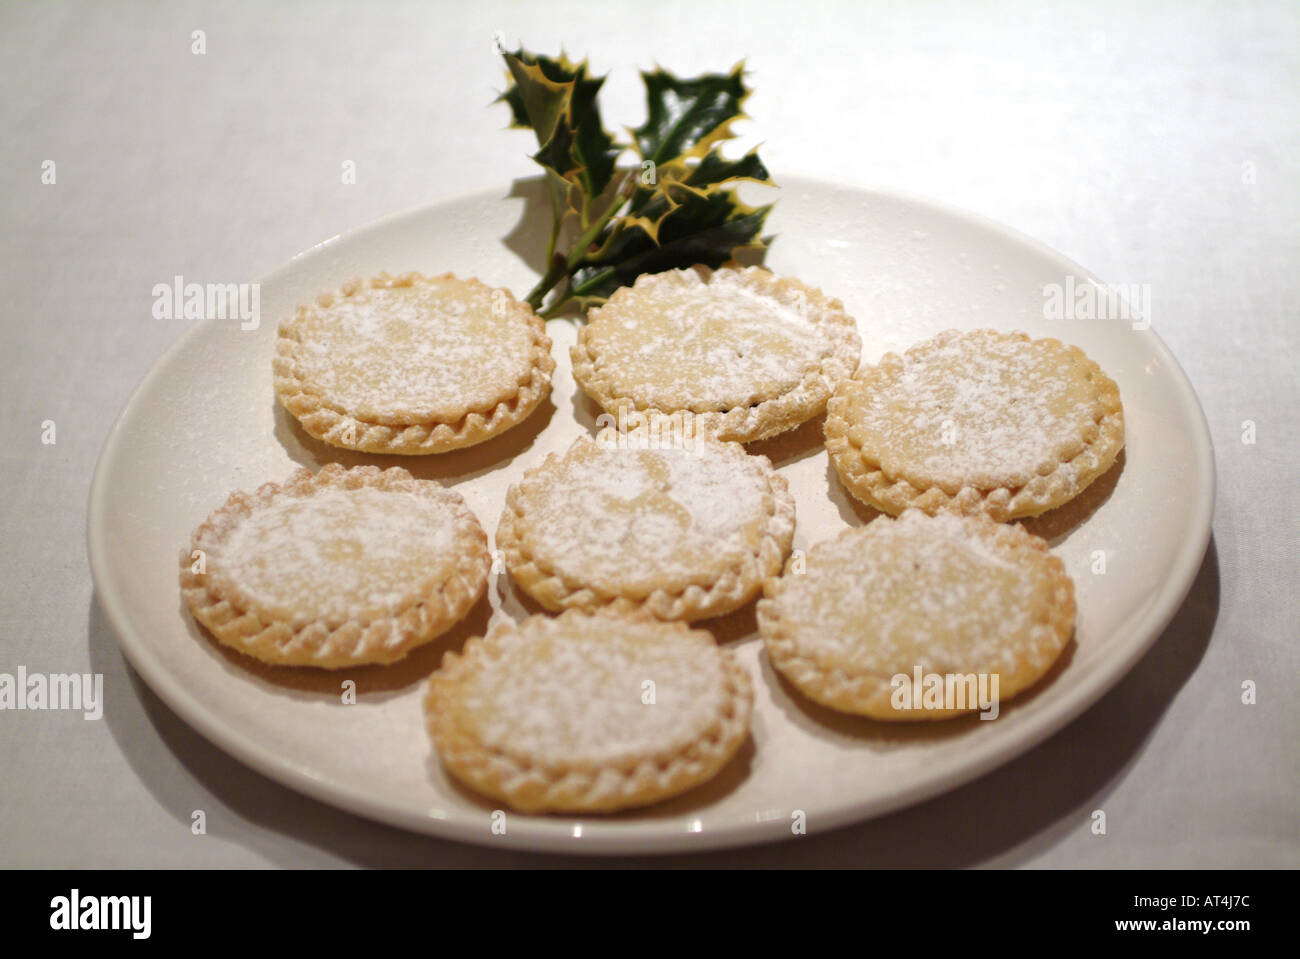 Mince Pies Sprinkled With Icing Sugar on White Plate With Sprig of Holly Stock Photo